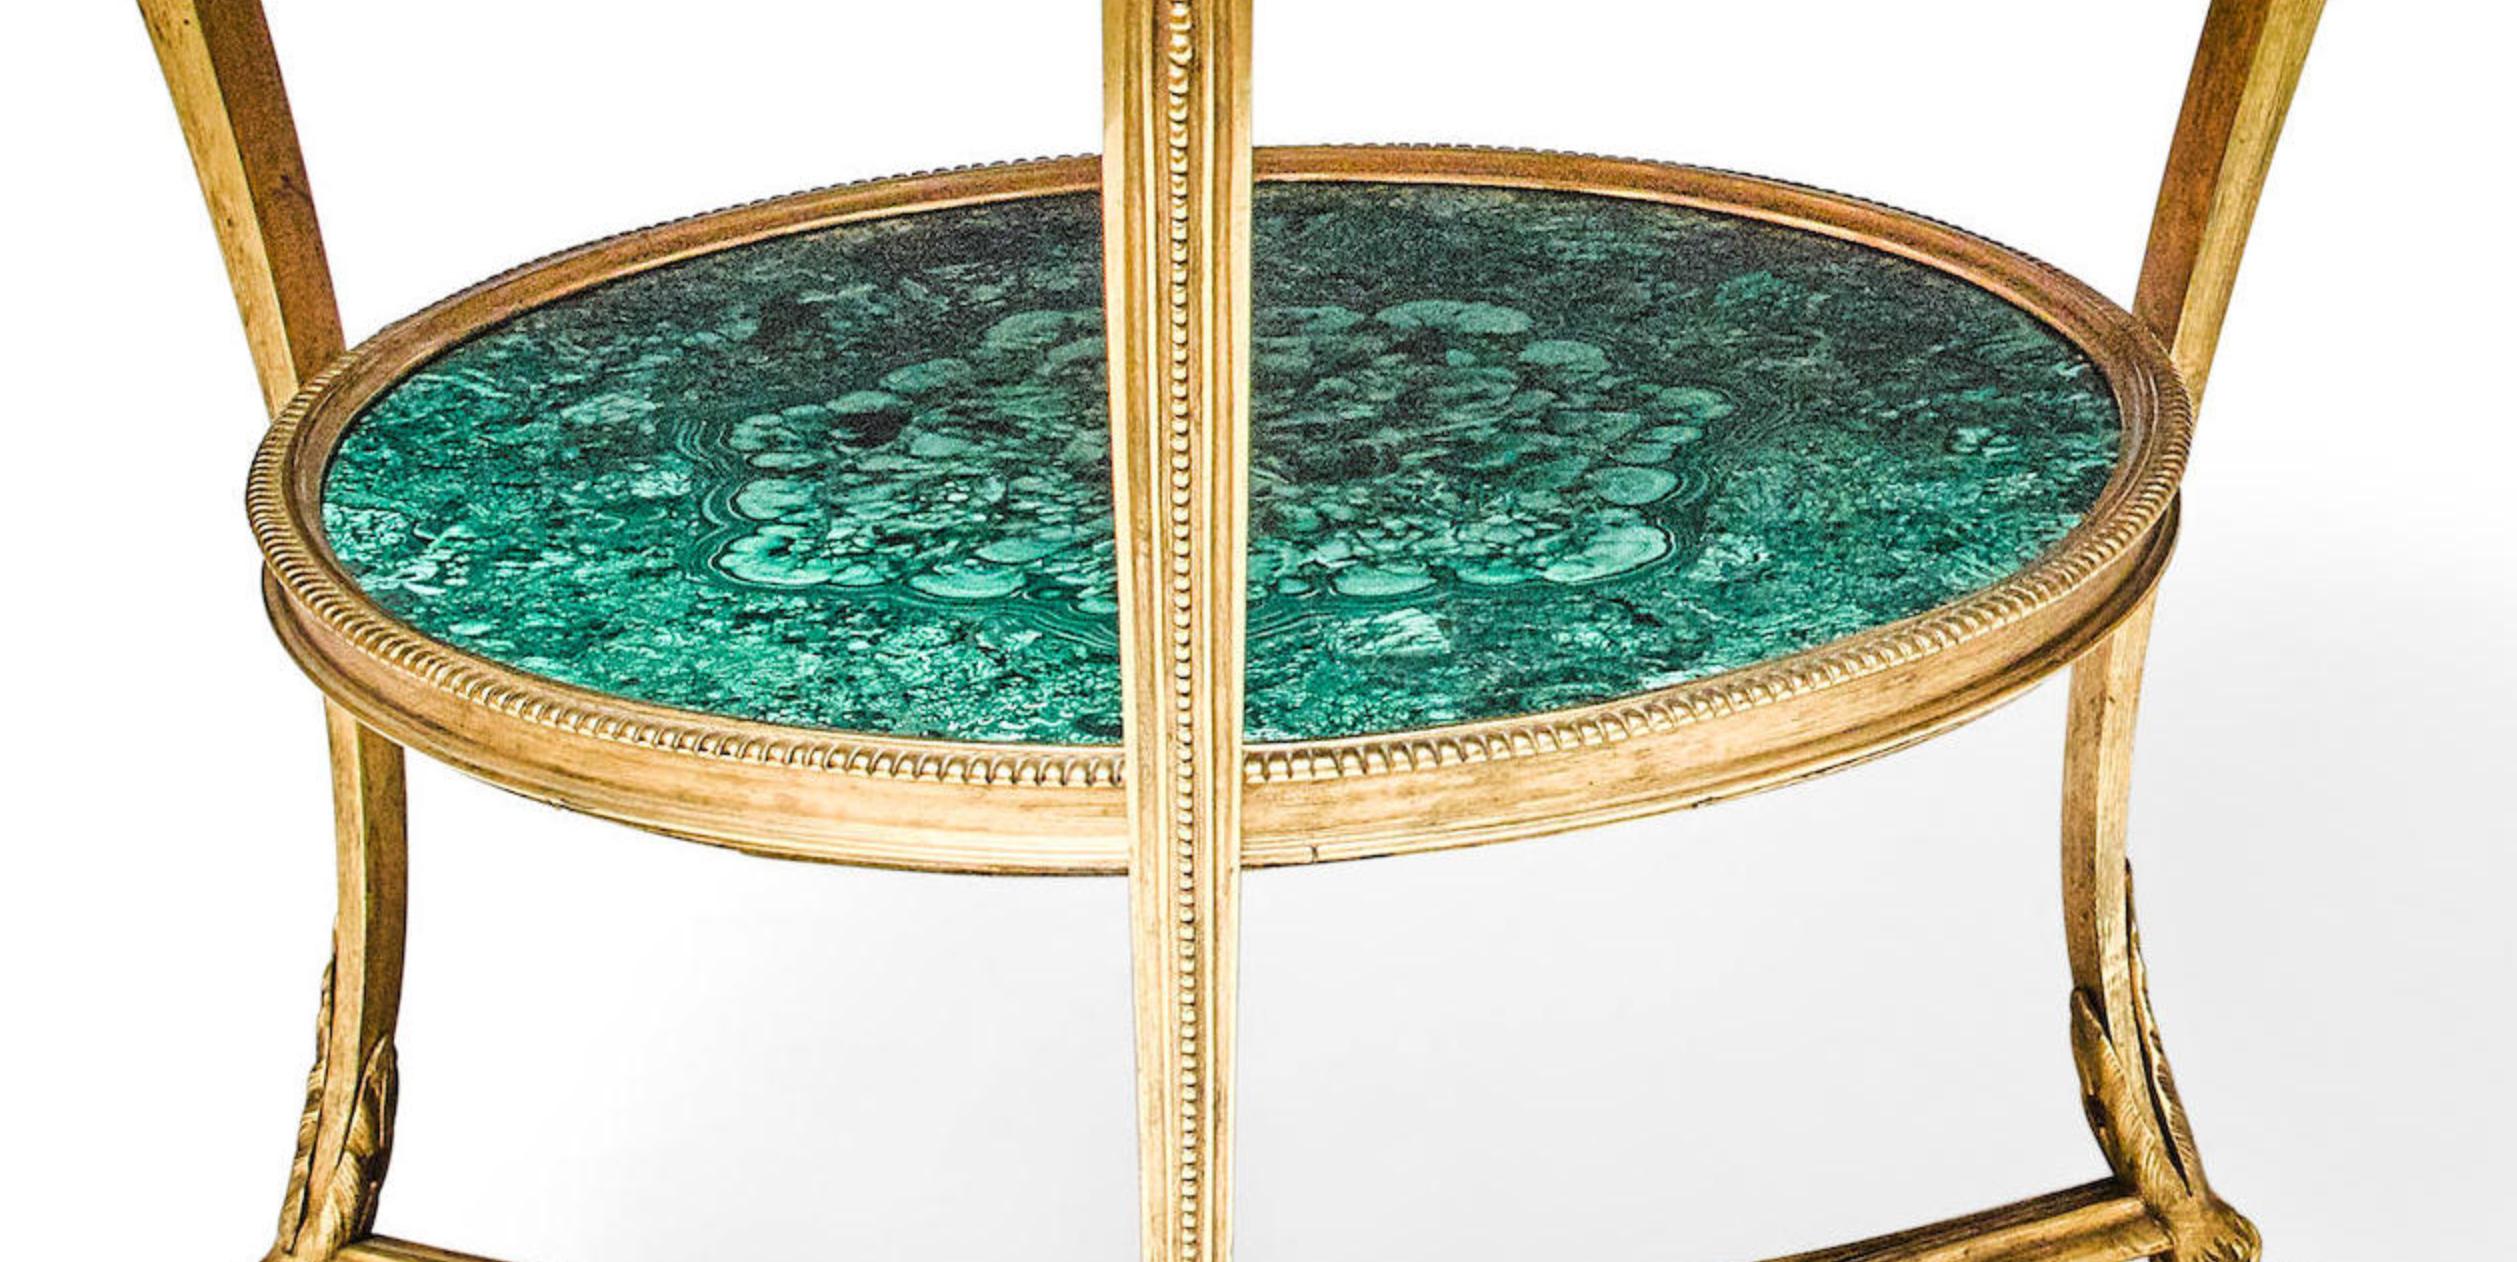 19th Century Fantastic Pair of Louis XVI Style Gilt Bronze and Malachite Gueridons Tables